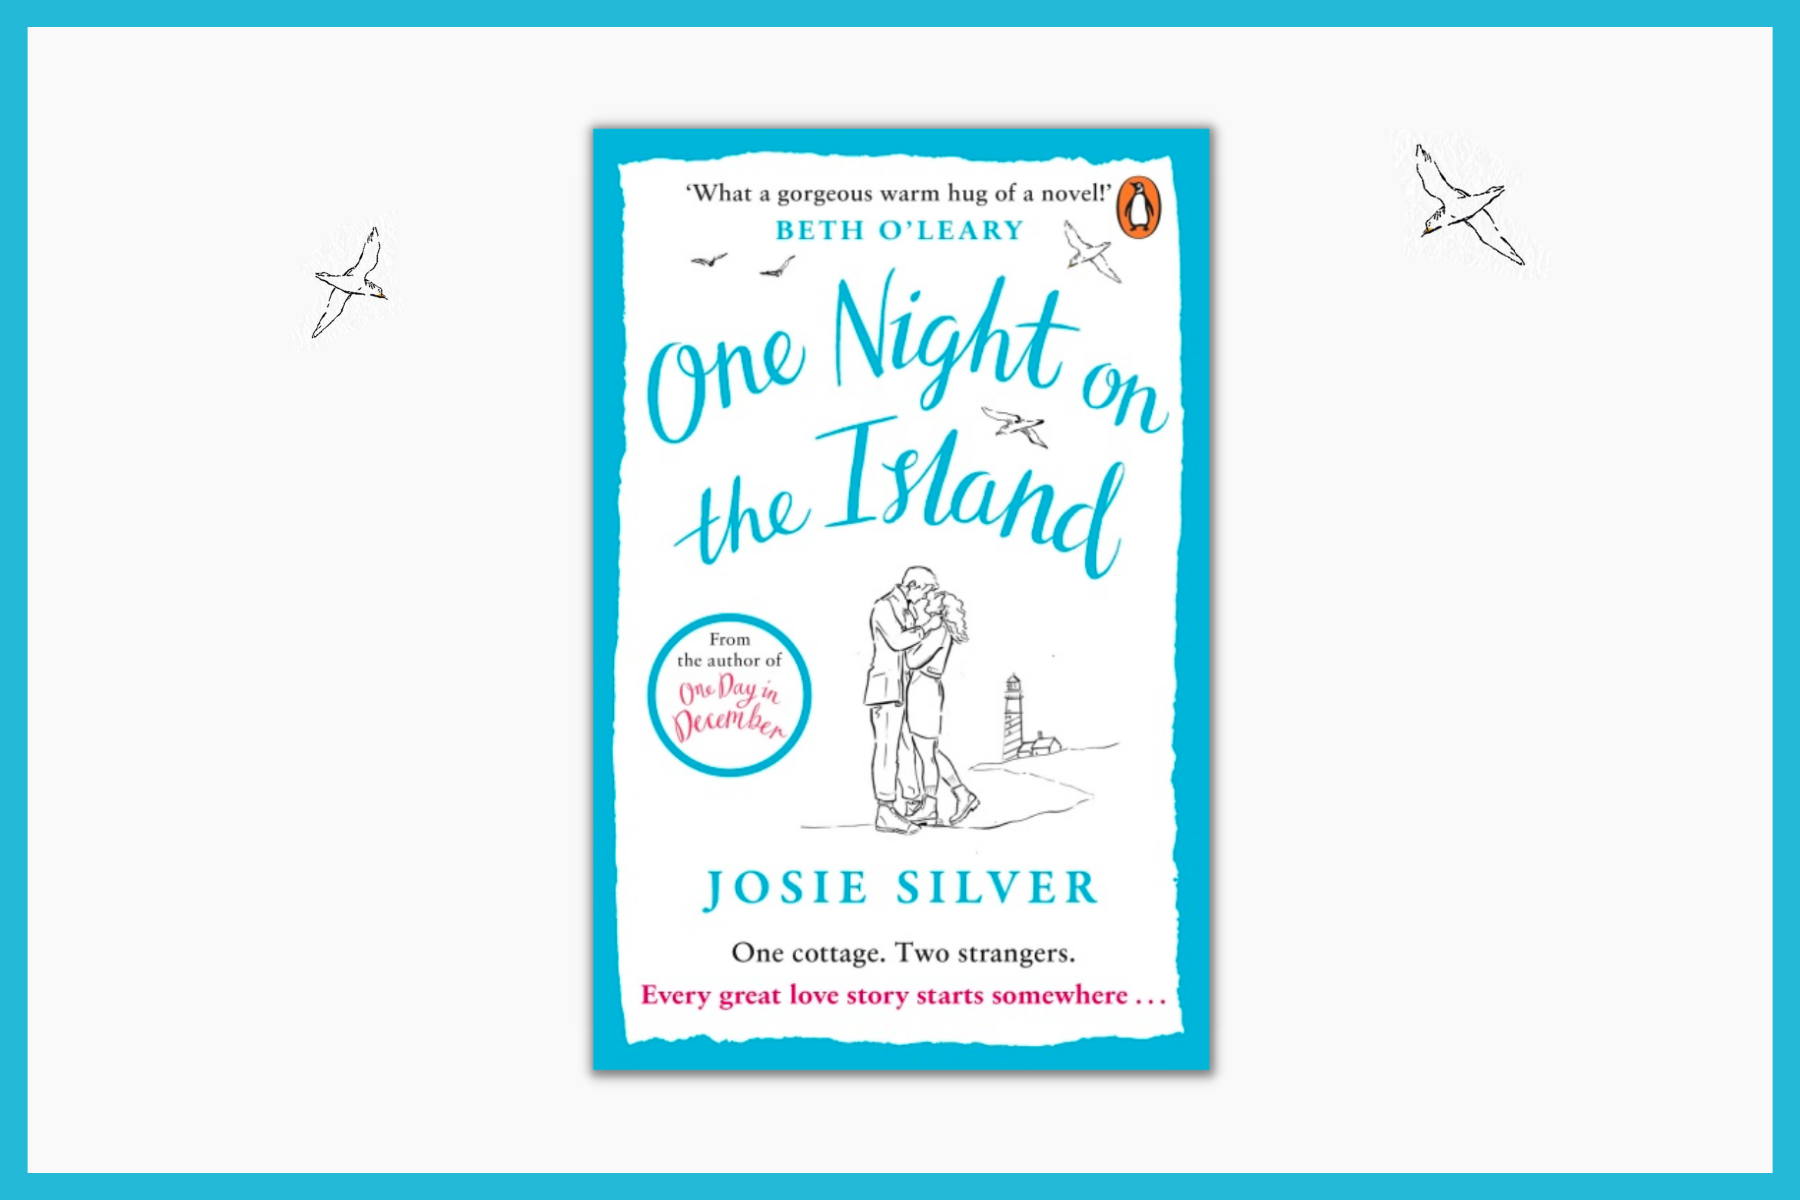 One Night on the Island by Josie Silver on a white background outlined with blue.